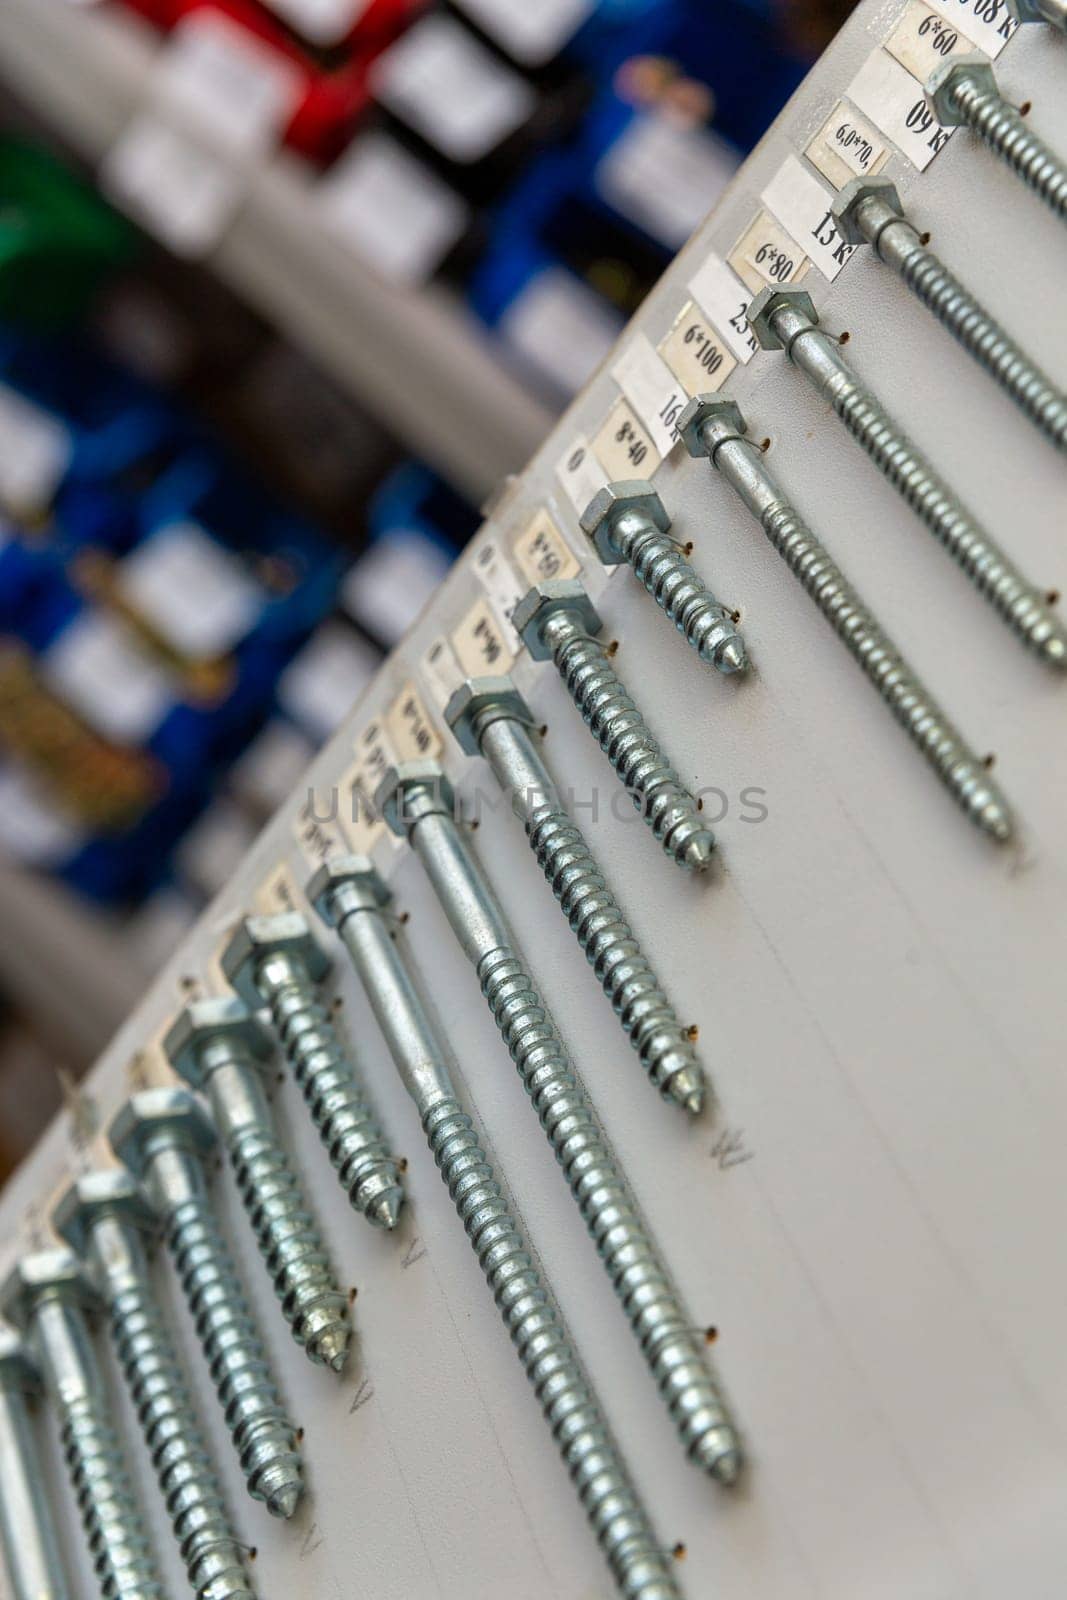 An assortment of screws with sizes and prices on the stand in the hardware store